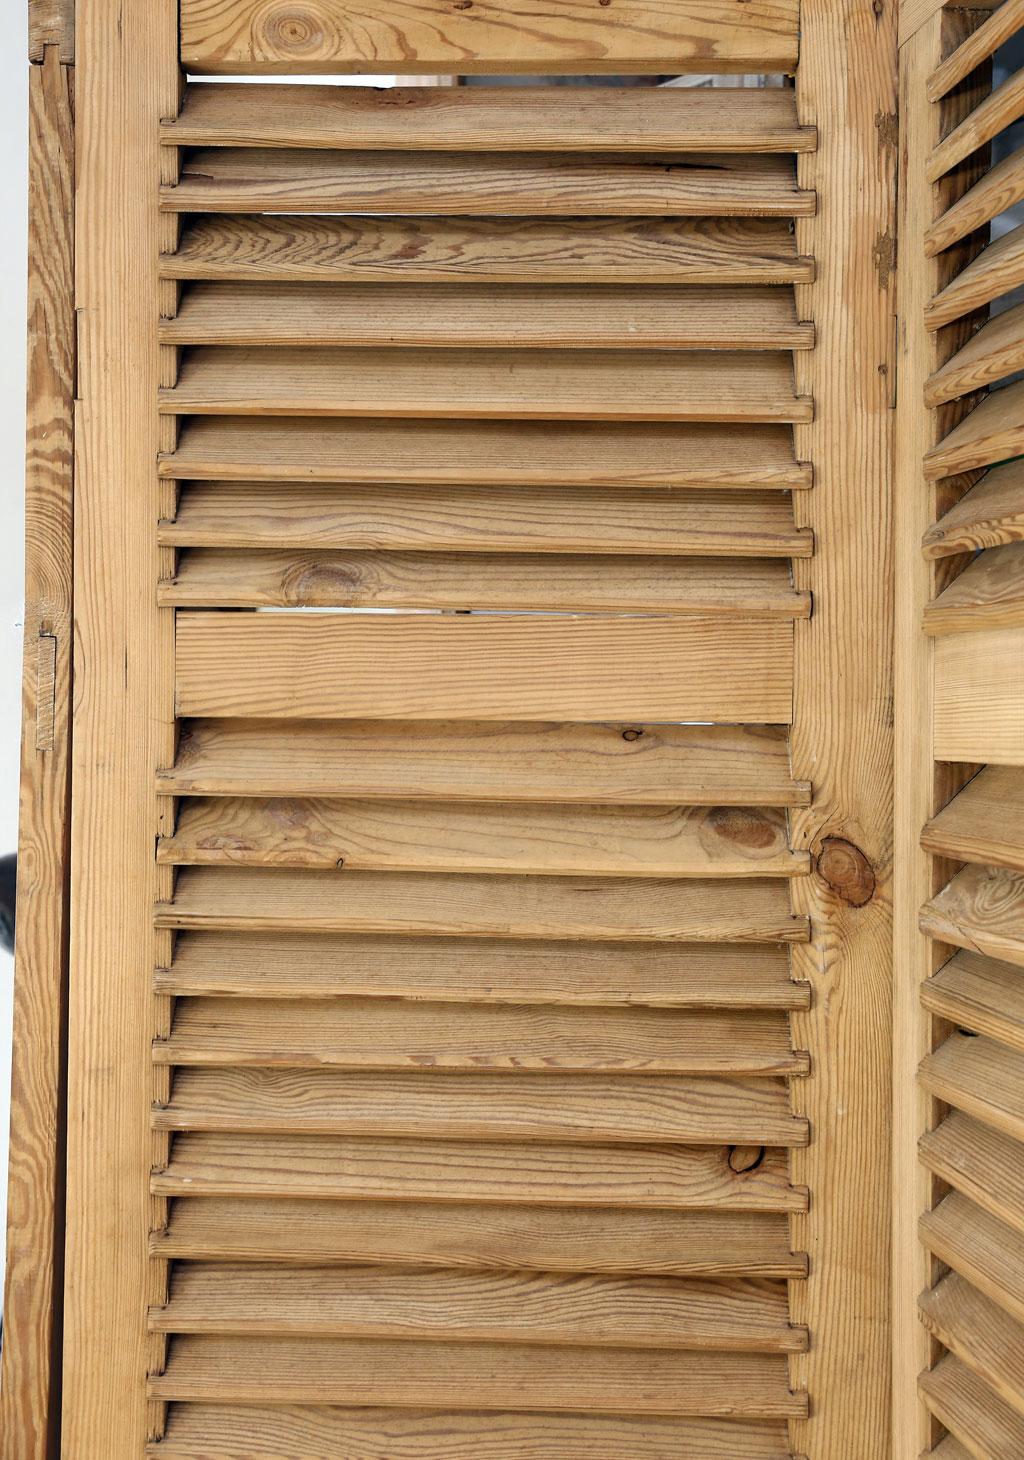 Set of six vintage French shutters with louvered panels. Hand carved in stripped pine, circa 1920-1940. Louvers are non-adjustable. Sold together as a set for $4,900.

Measures: Three shutters 83.5 inches high x 22 inches wide x 1.75 inches deep